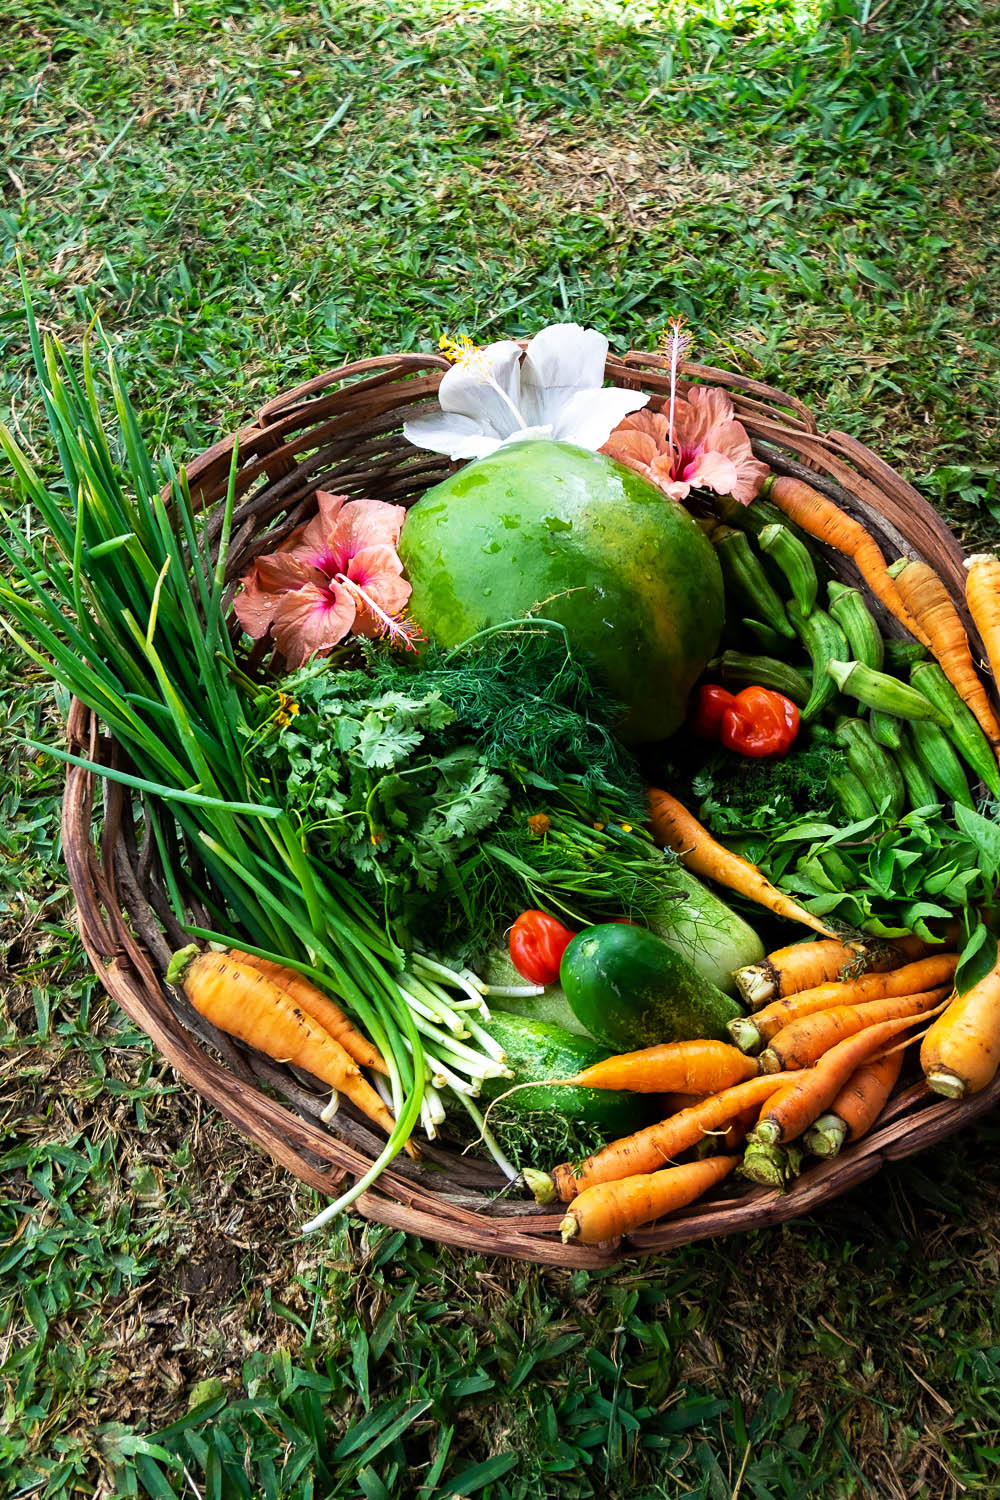 Locally sourced produce at PEG Farm | A 5-Day Itinerary of What to See and Eat around Barbados